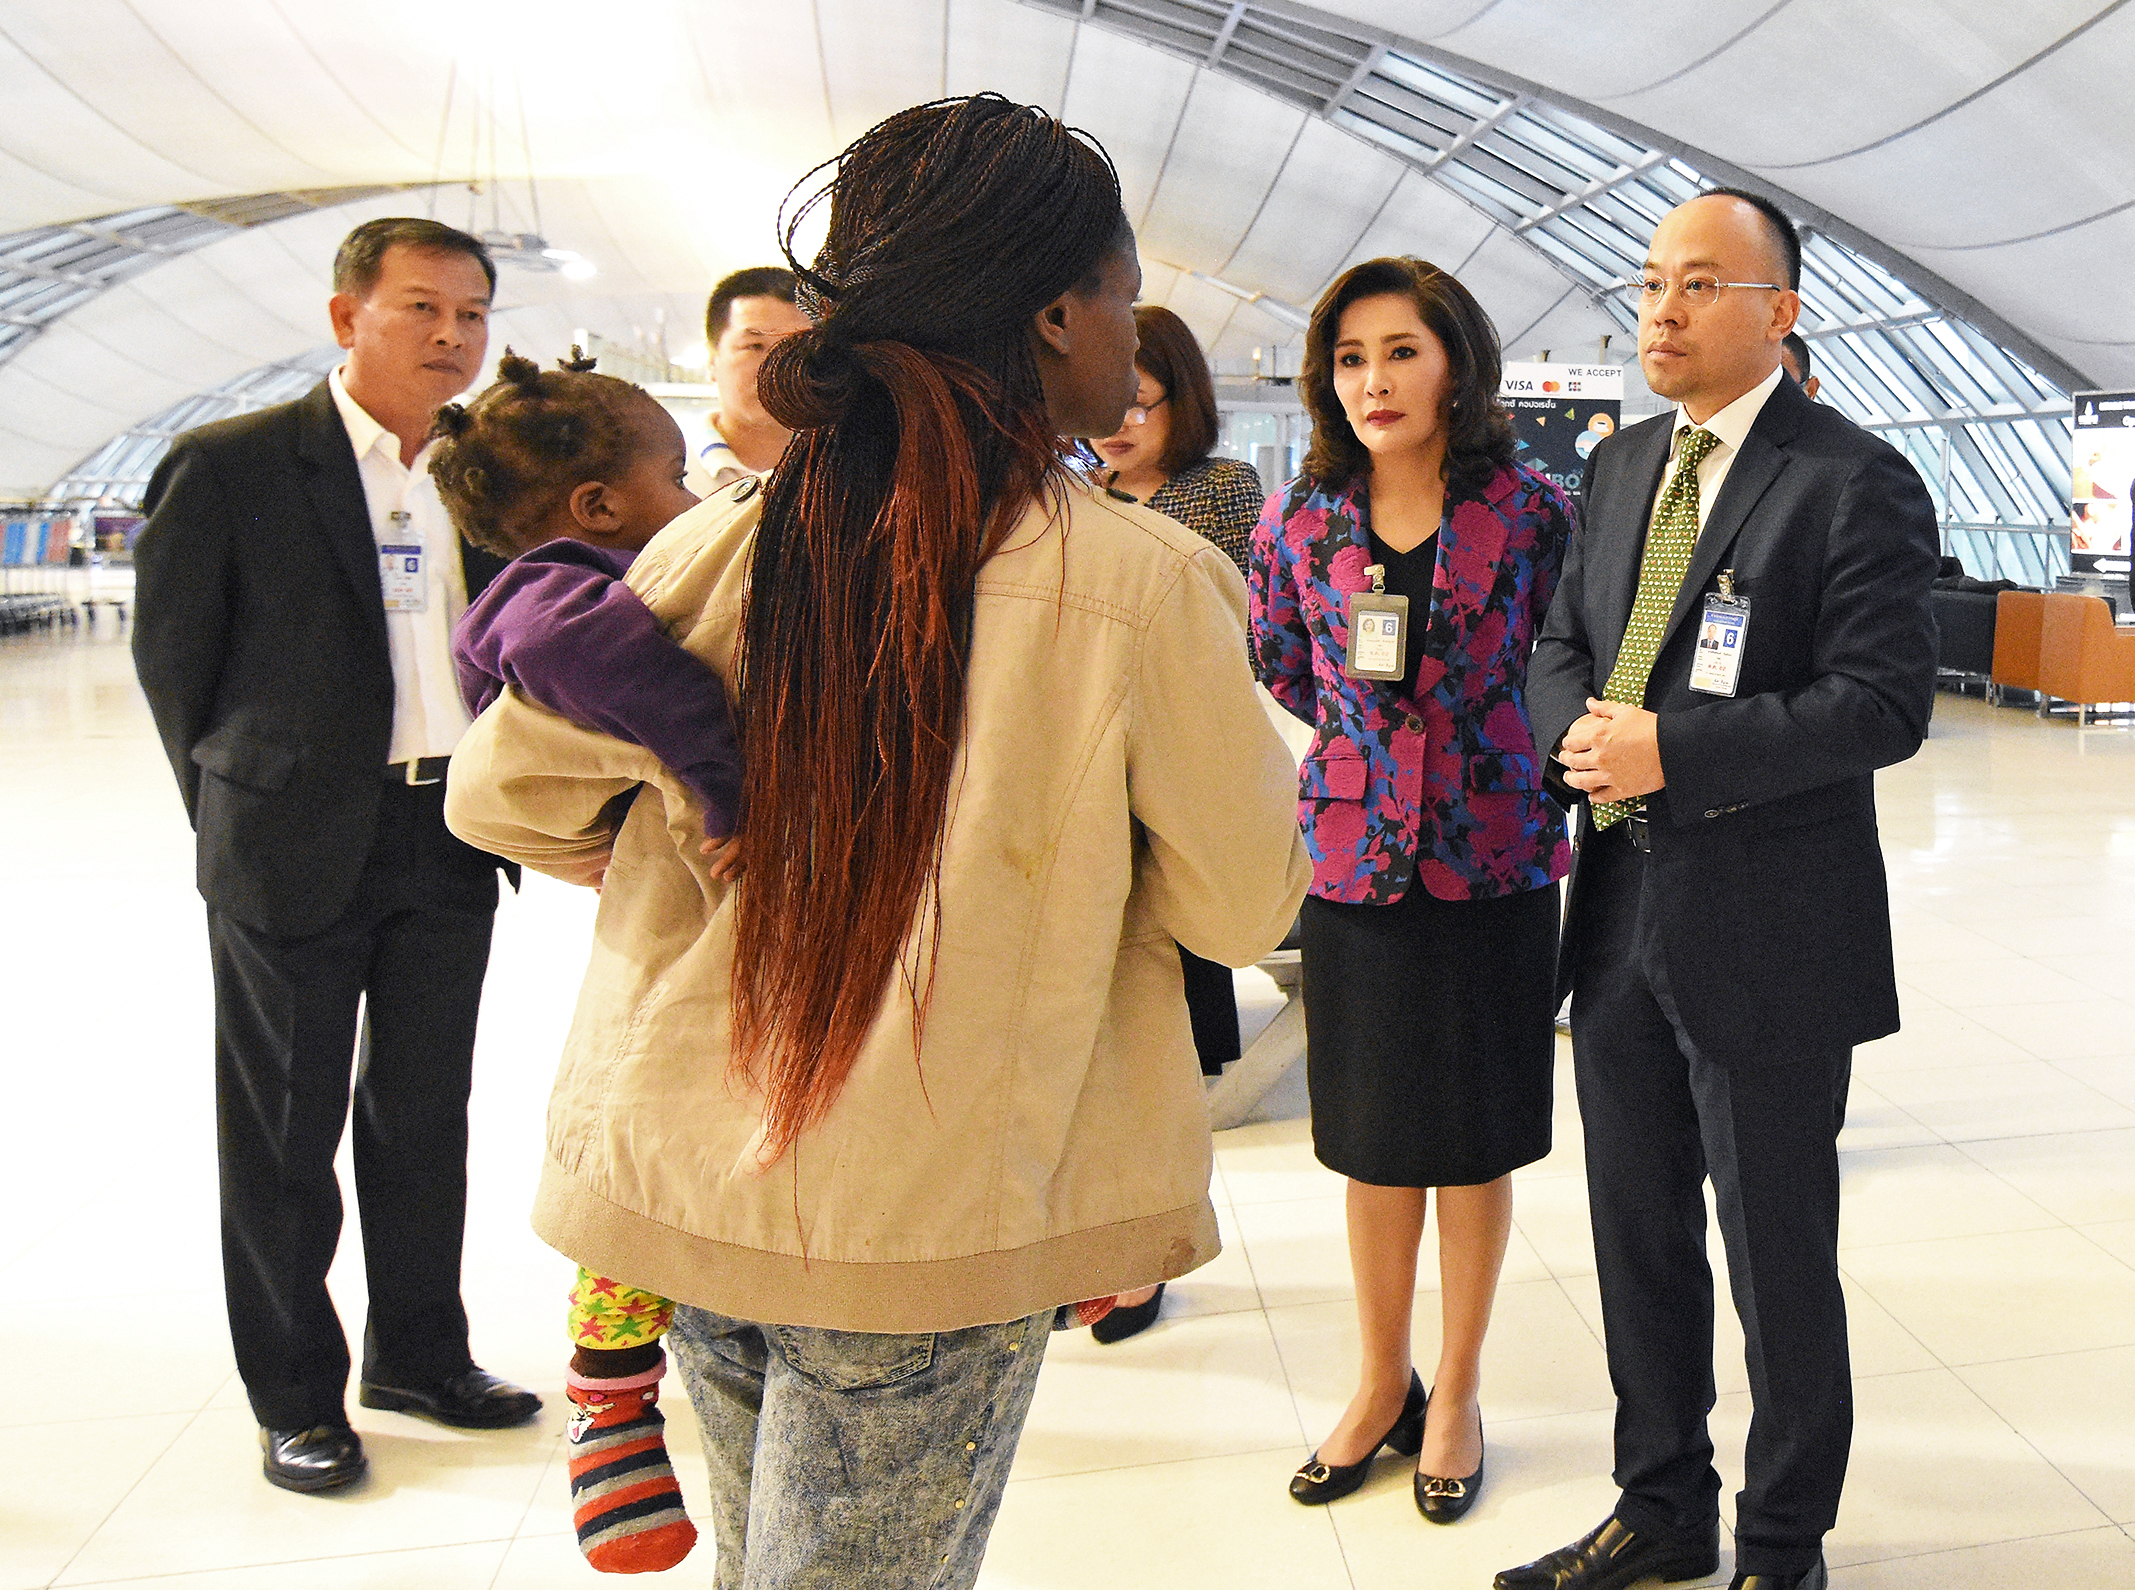 epa06408006 Thai airport officials talk to members of a Zimbabwean family that has been stranded for three months at Suvarnabhumi International Airport in Samut Prakan province, on the outskirts of Bangkok, Thailand, 27 December 2017 (issued 28 December 2017). Eight people of a family including four young children from Zimbabwe has been living in the Suvarnbhumi airport for three months as they awaiting their asylum pending process for refugee status from the United Nation.  EPA-EFE/STR THAILAND OUT (STR&mdash;EPA-EFE)